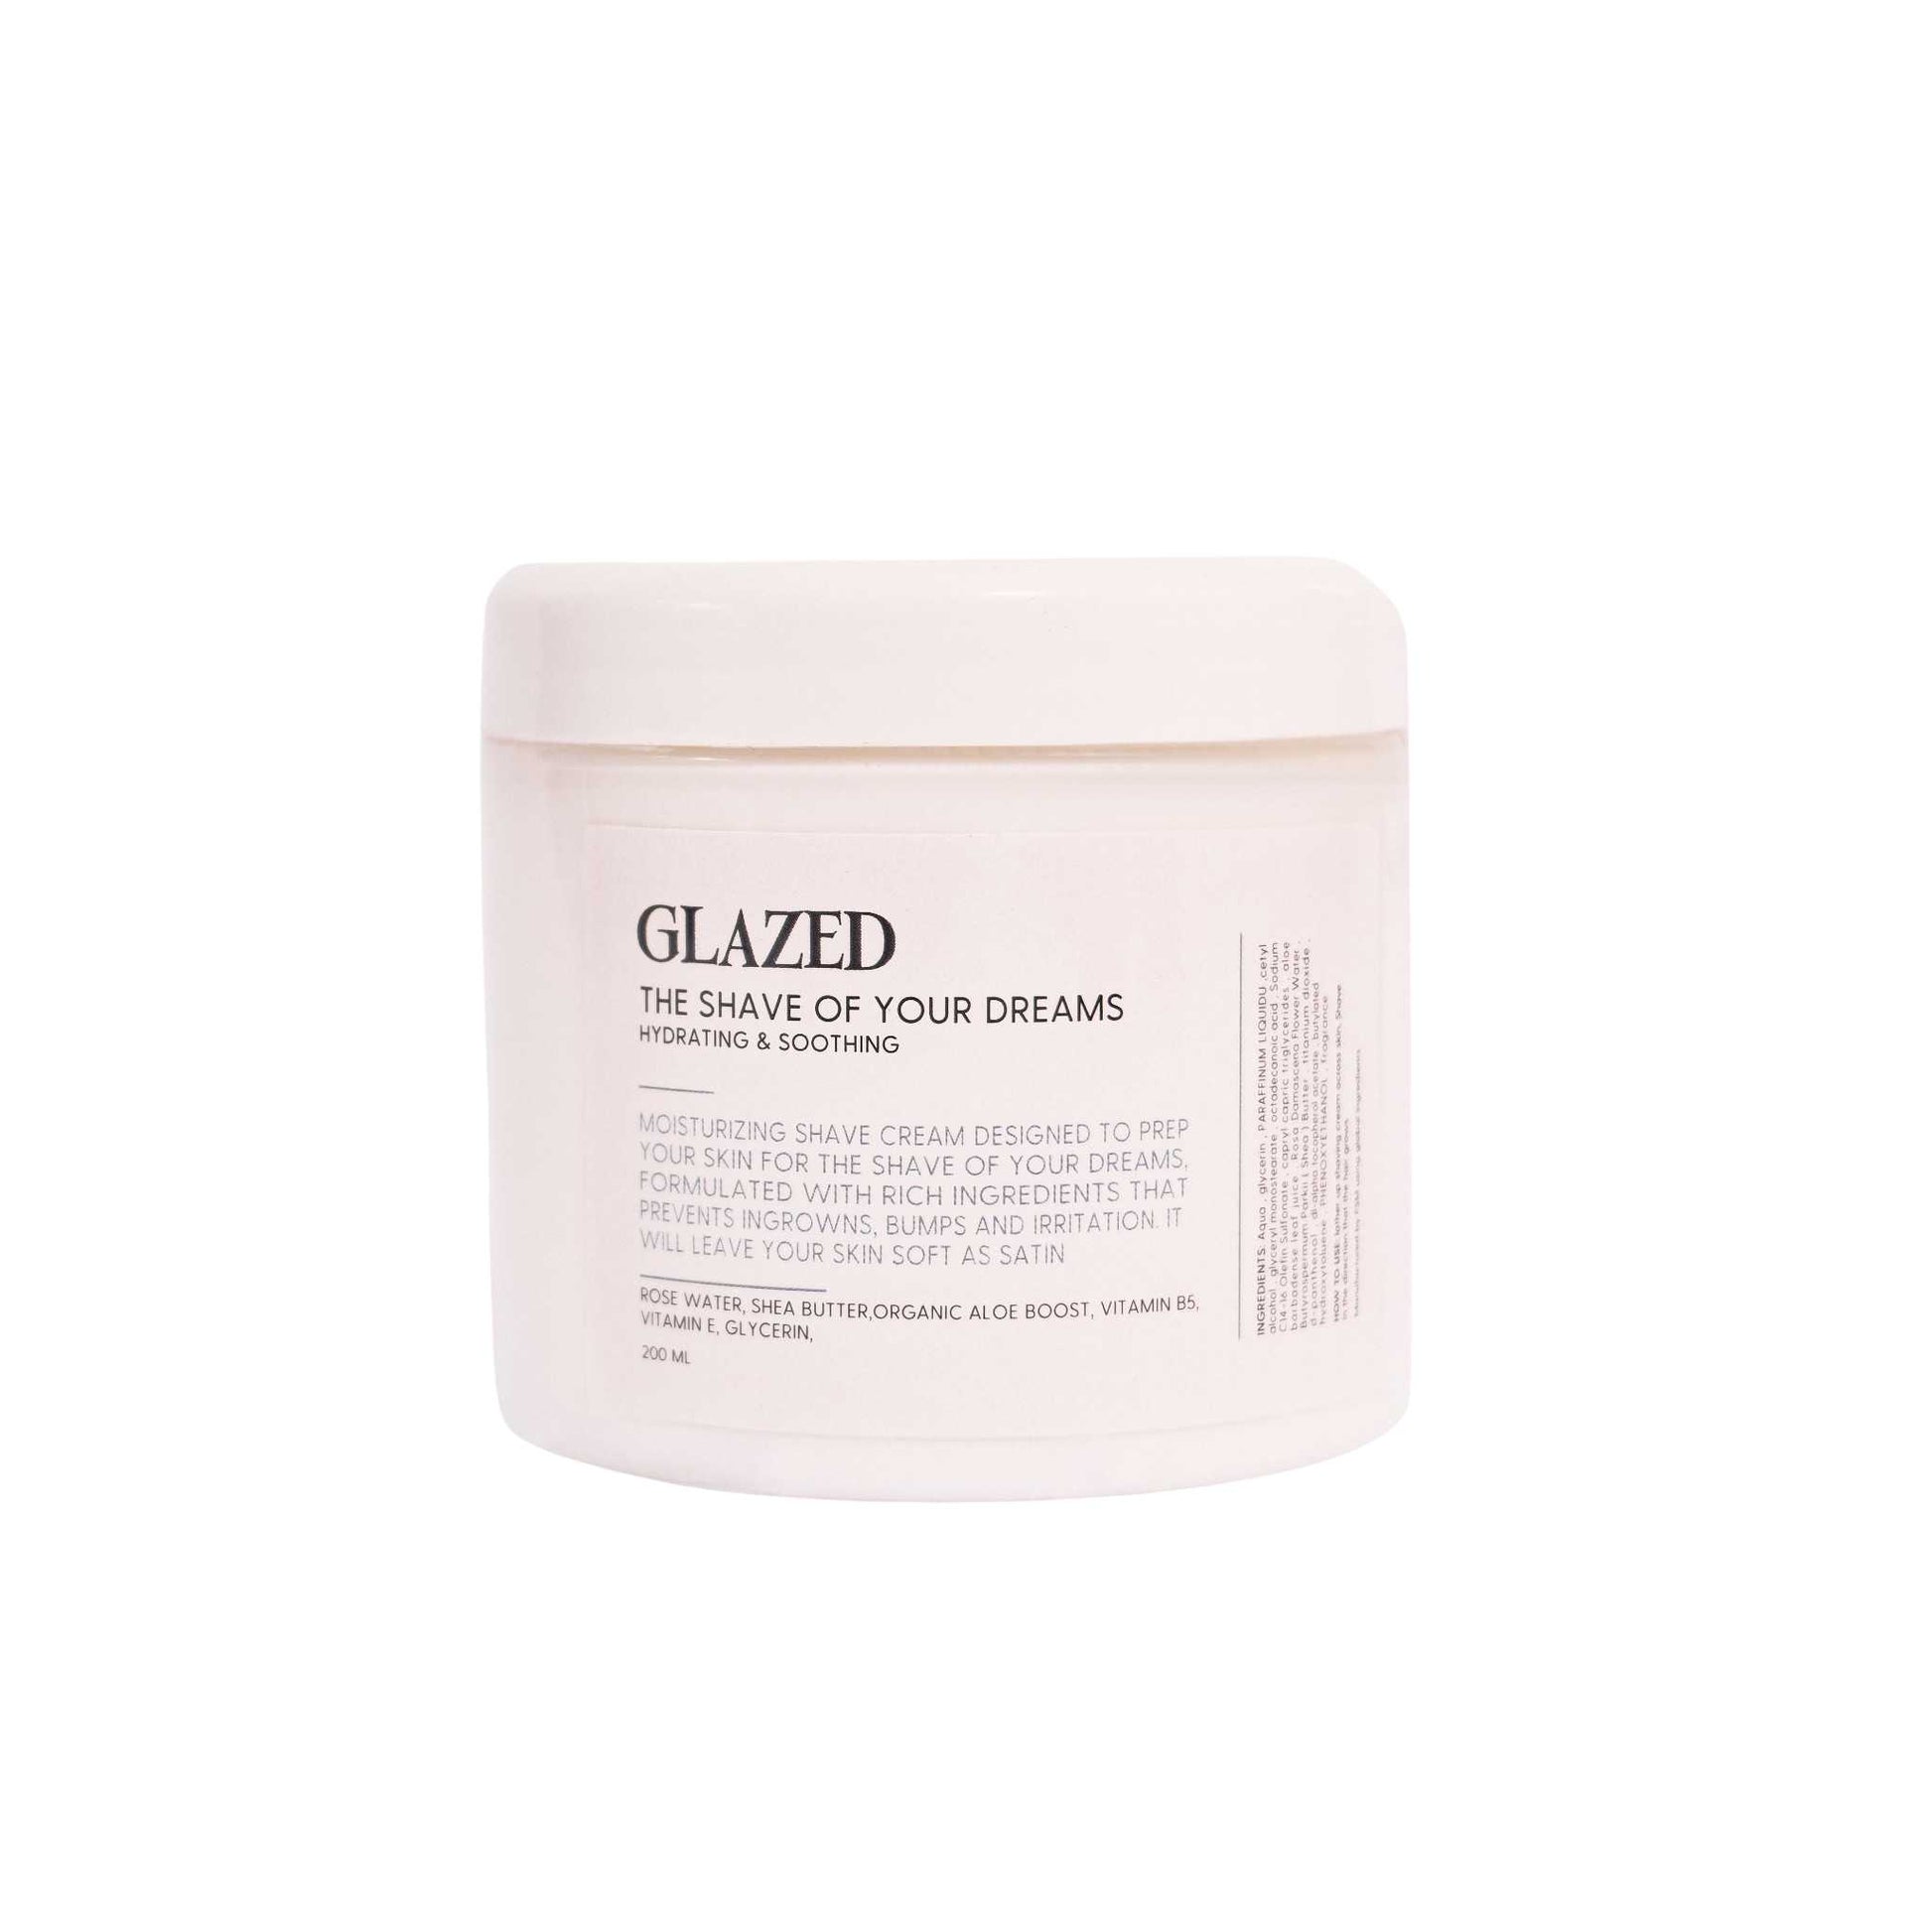 GLAZED -The Shave Of Your Dreams-200ml- EXCLUSIVE Glazed